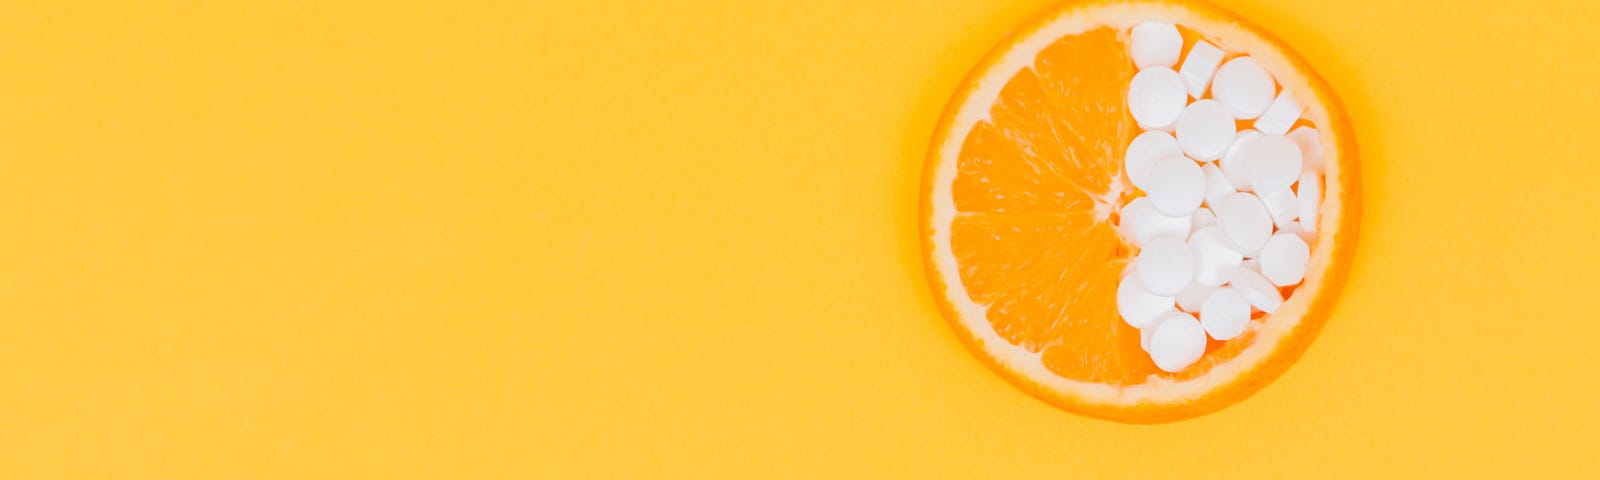 A sliced orange is perched on the upper right of a yellow background. The left of the orange is as expected while the right side is filled with white pills. Recent data suggests vitamin D supplementation lowers the risk of autoimmune diseases.